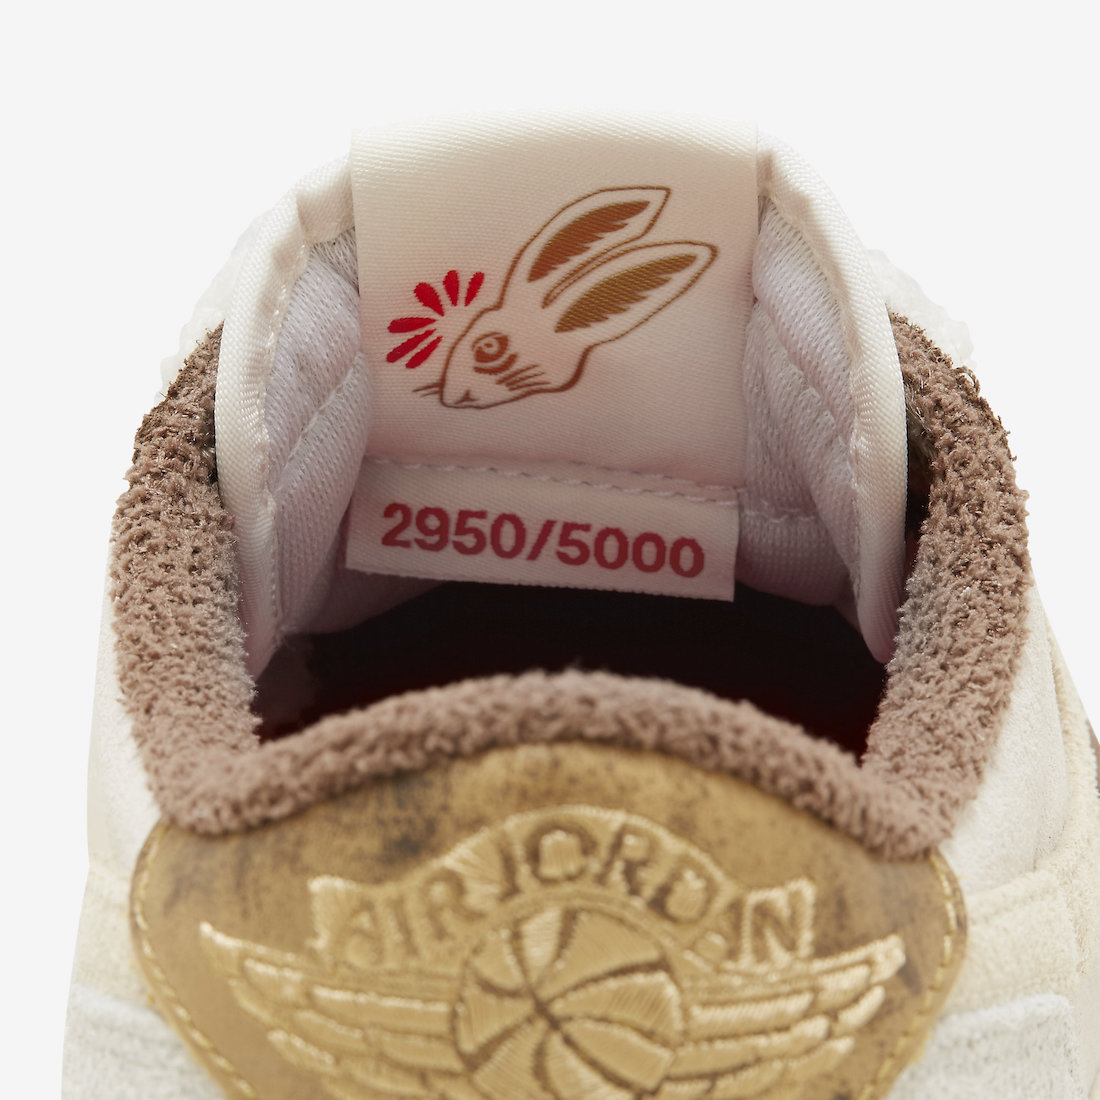 Air Jordan 1 Low Year of the Rabbit DV1312-200 Release Date Limited to 5000 pairs